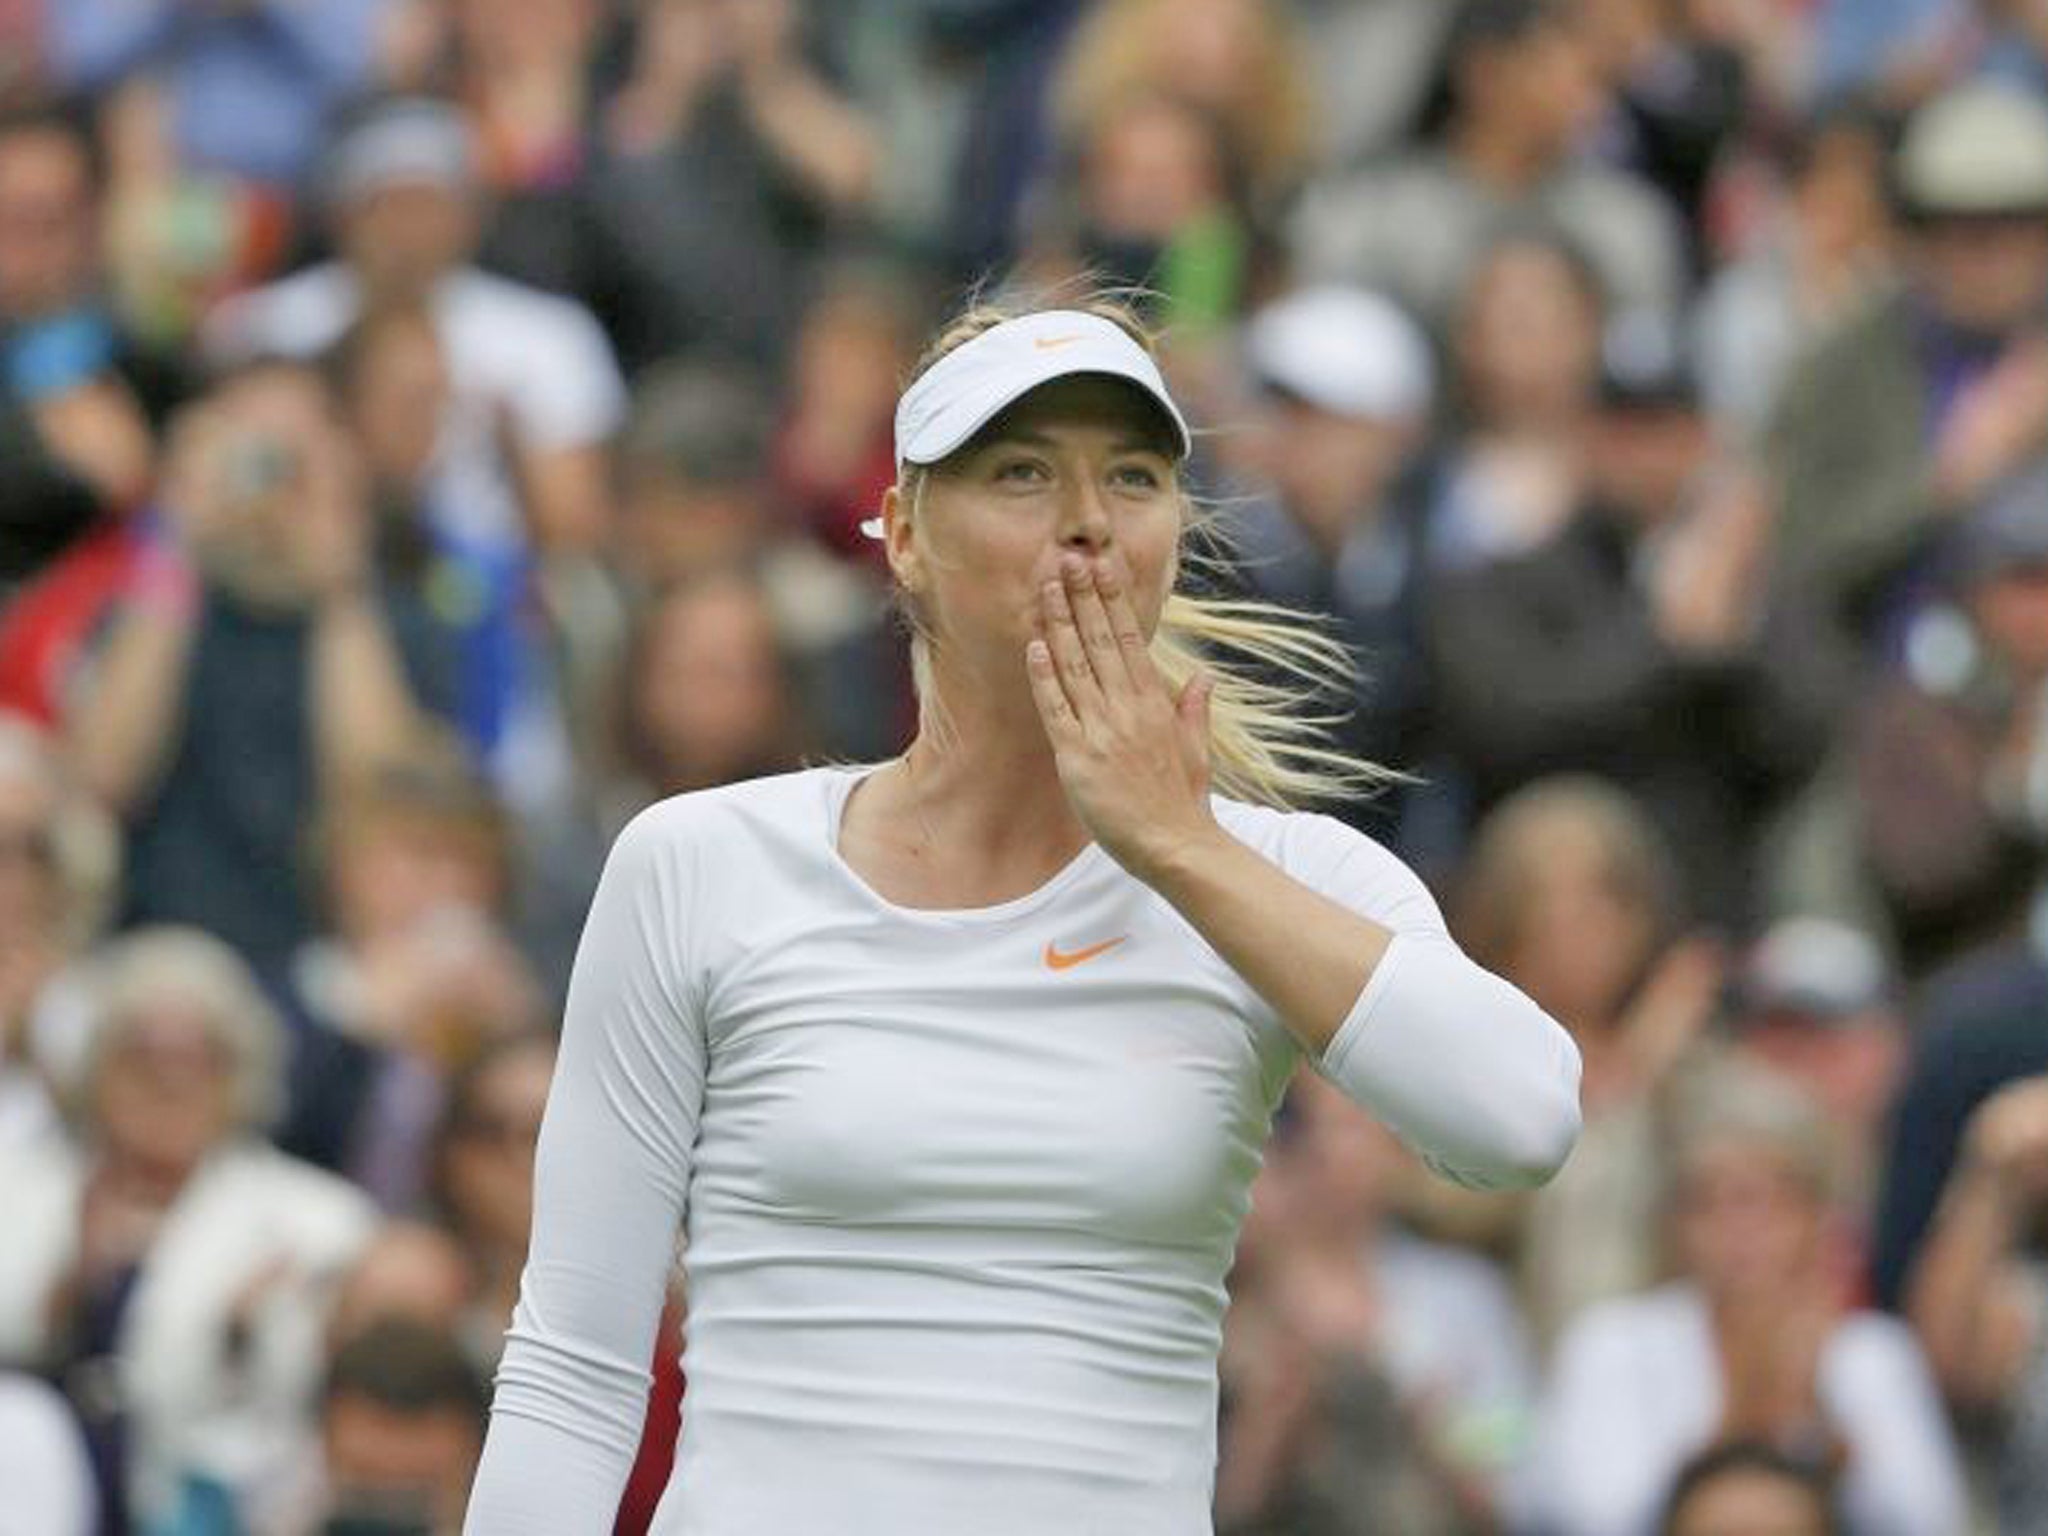 Maria Sharapova knew the enquiry about the 'love-triangle feud' with Serena Williams was coming and despatched it as she does most opponents, though more quietly